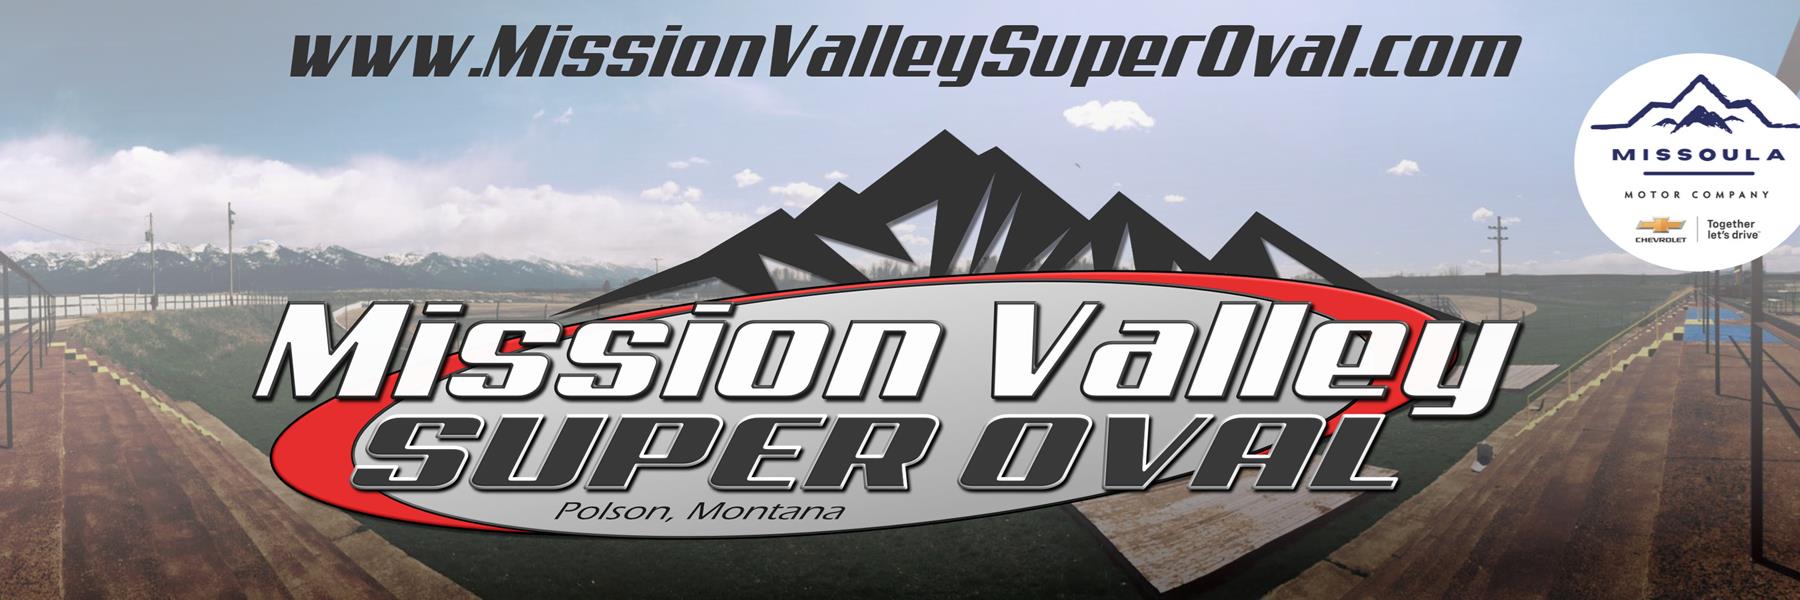 5/29/2021 - Mission Valley Super Oval